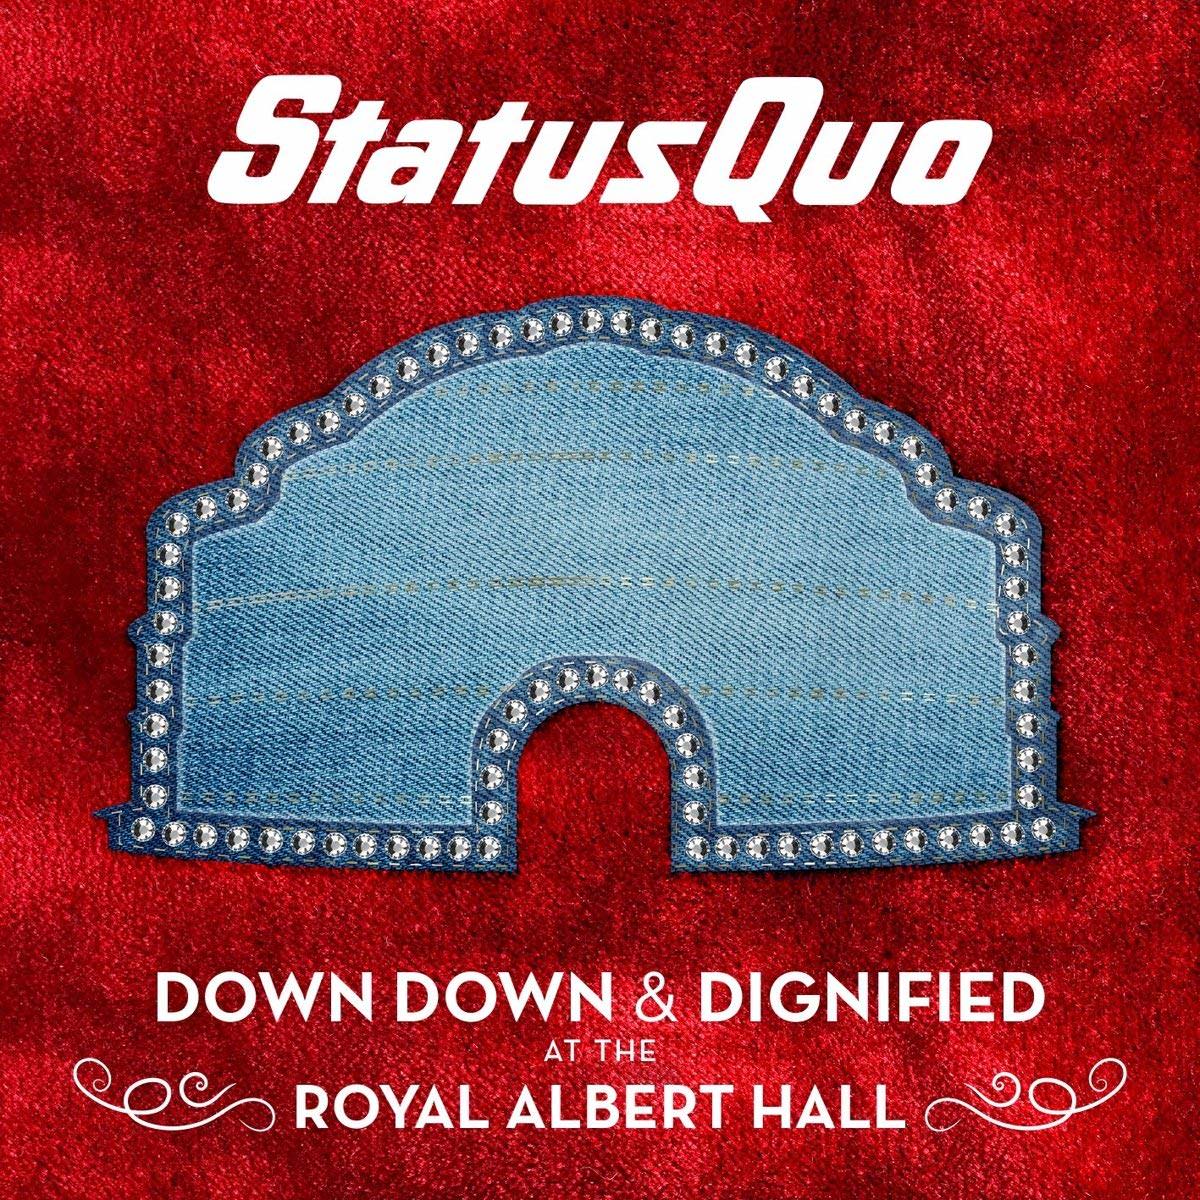 Status Quo - Down Down & Dignified at the Royal Albert Hall (2018) [FLAC 24bit/96kHz]